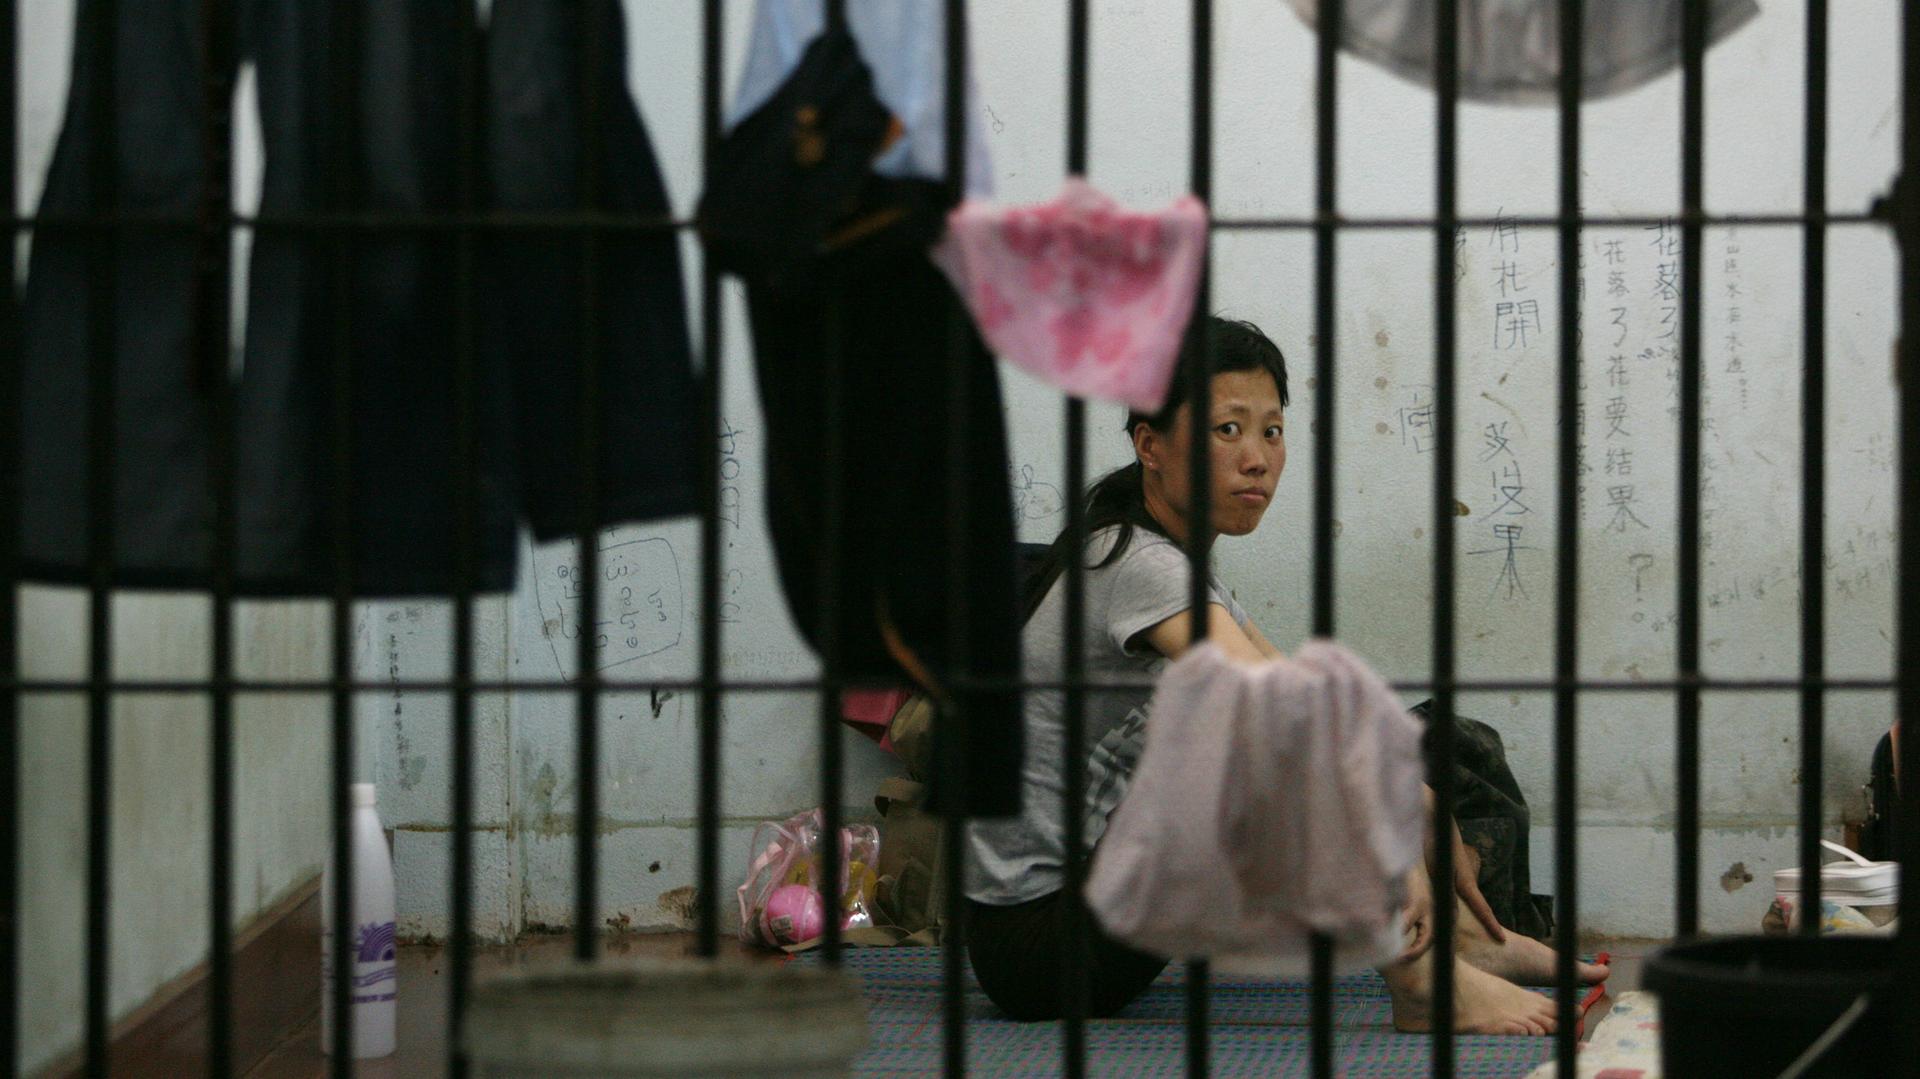 Cheong-Suk Ryang, 36, a defector from North Korea hoping to reach South Korea via Thailand, sits in her cell at the Chiang Saen police station in Thailand, after she and four other North Korean women were arrested on the Thai-Lao border. Photo taken May 9